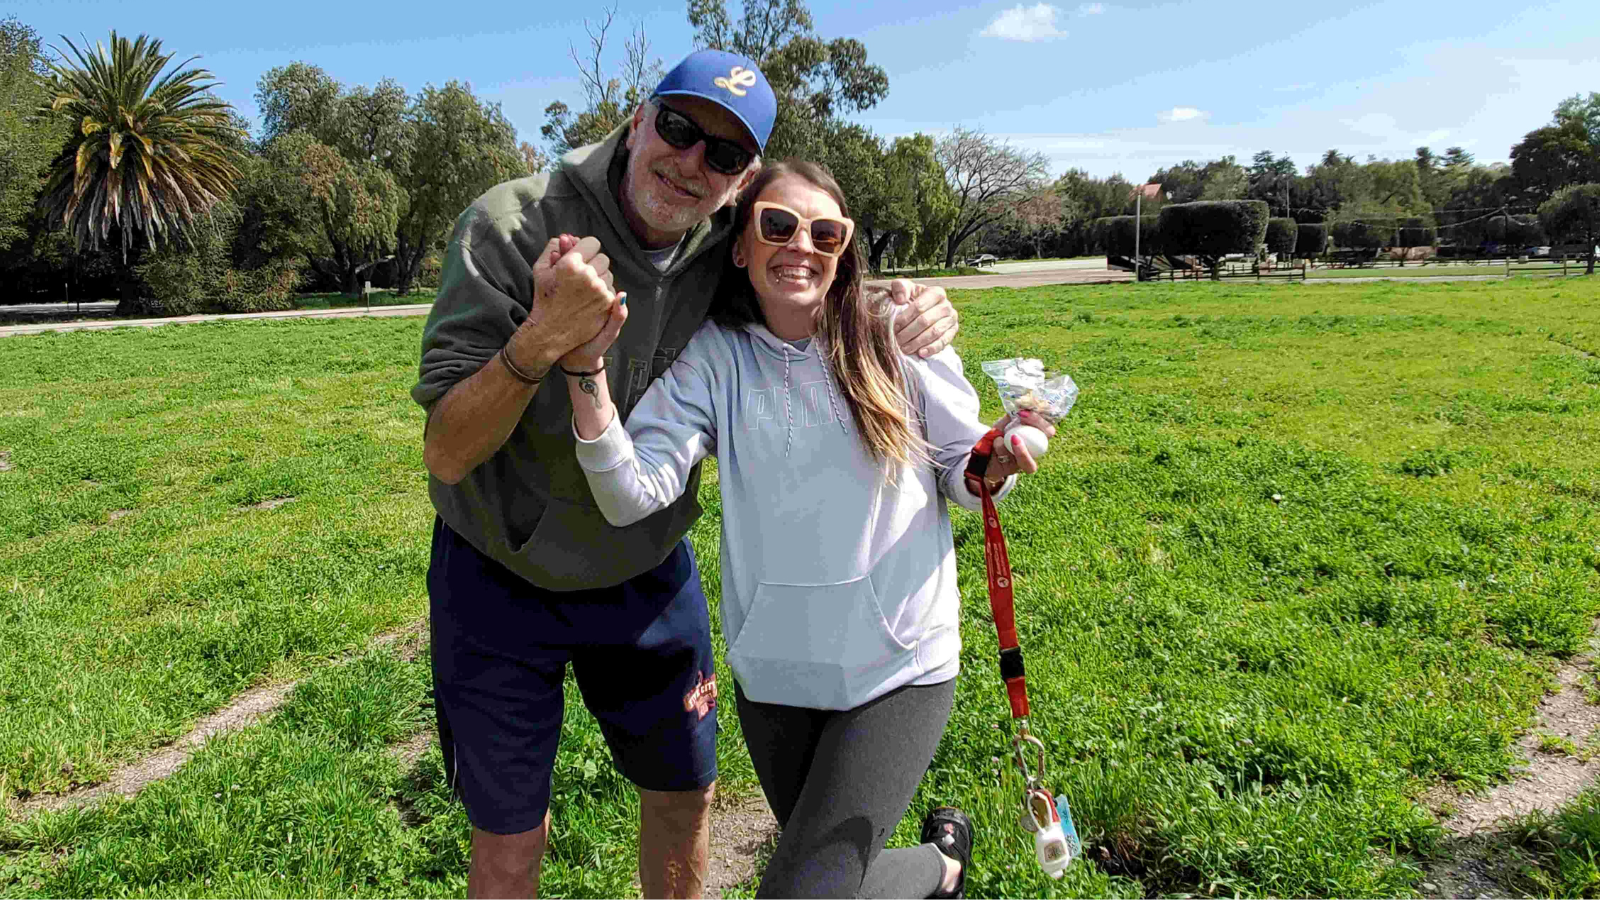 Photo caption: Santa Barbara Partnership AmeriCorps Members Ashley Przecha and George Crowder teamed up together to win an egg toss during a team building event in Los Olivos, California.